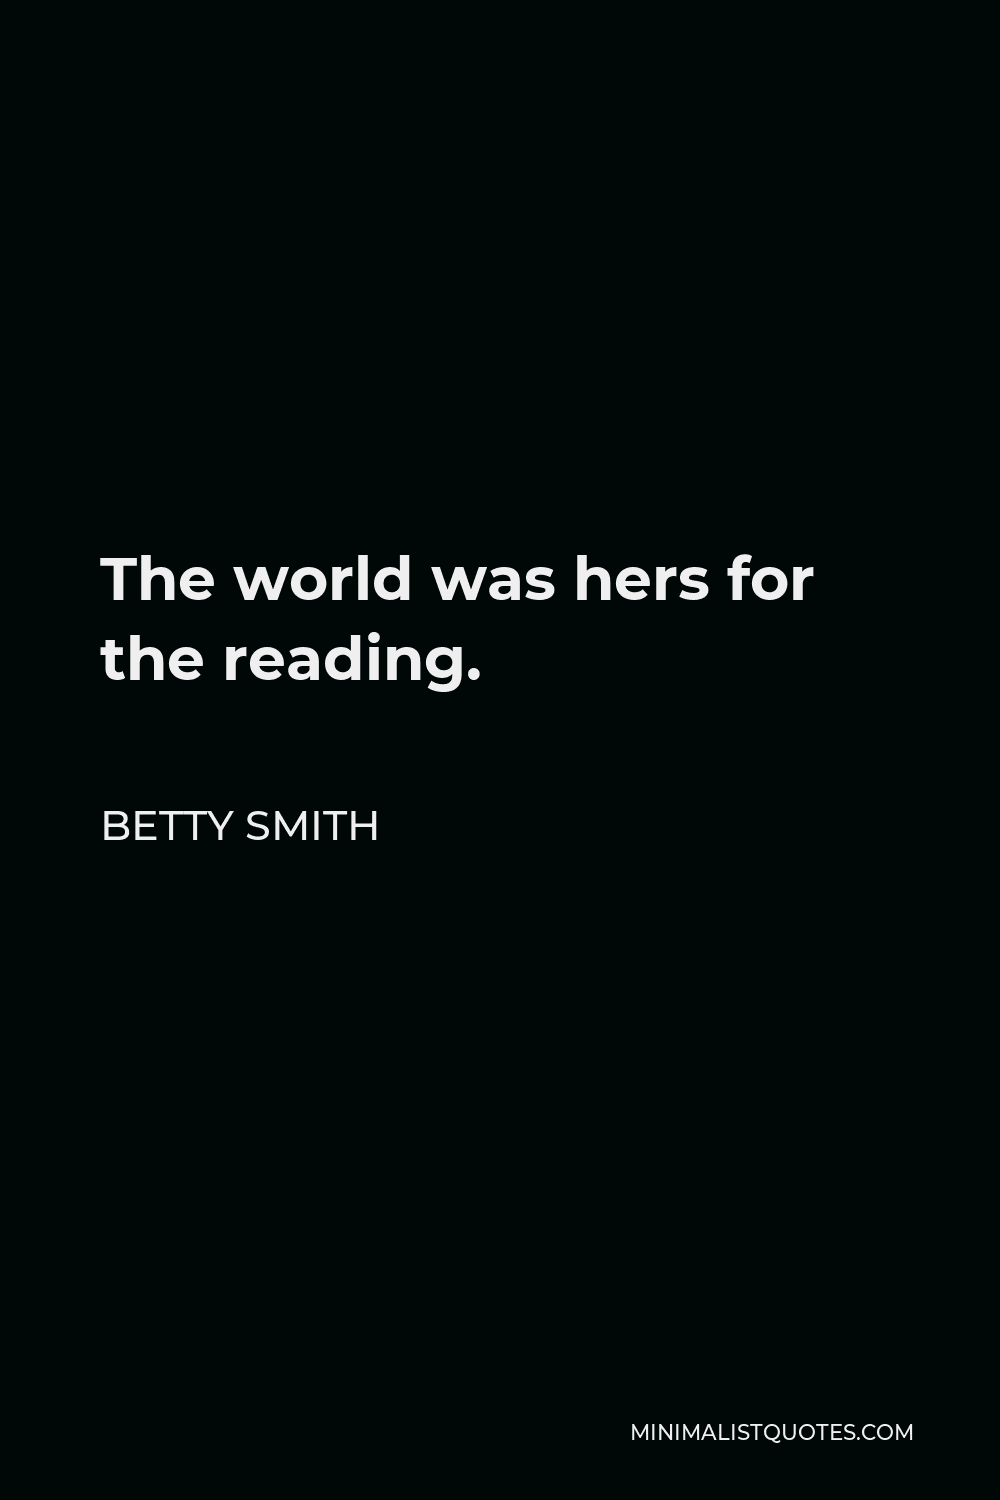 Betty Smith Quote - The world was hers for the reading.